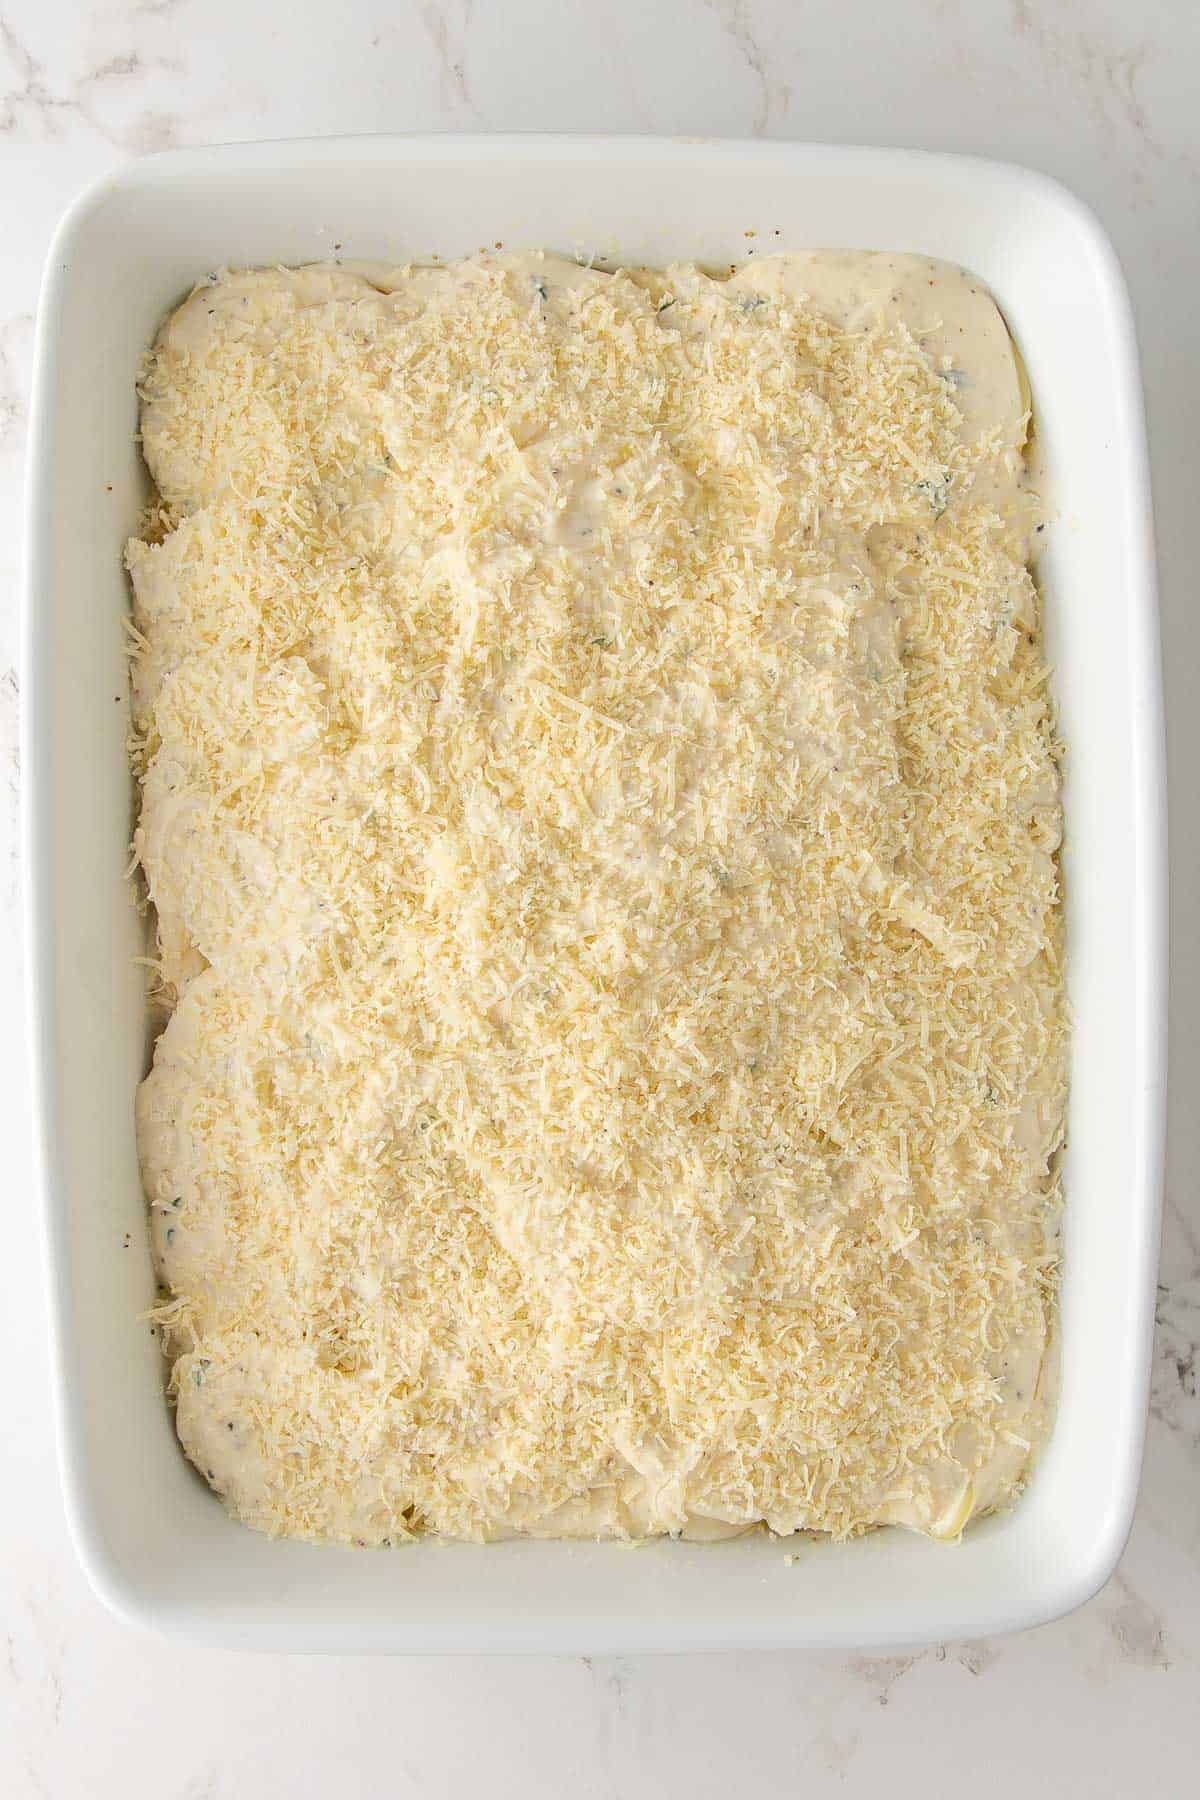 Overhead view of a dish of unbaked scalloped potatoes sprinkled with Parmesan.